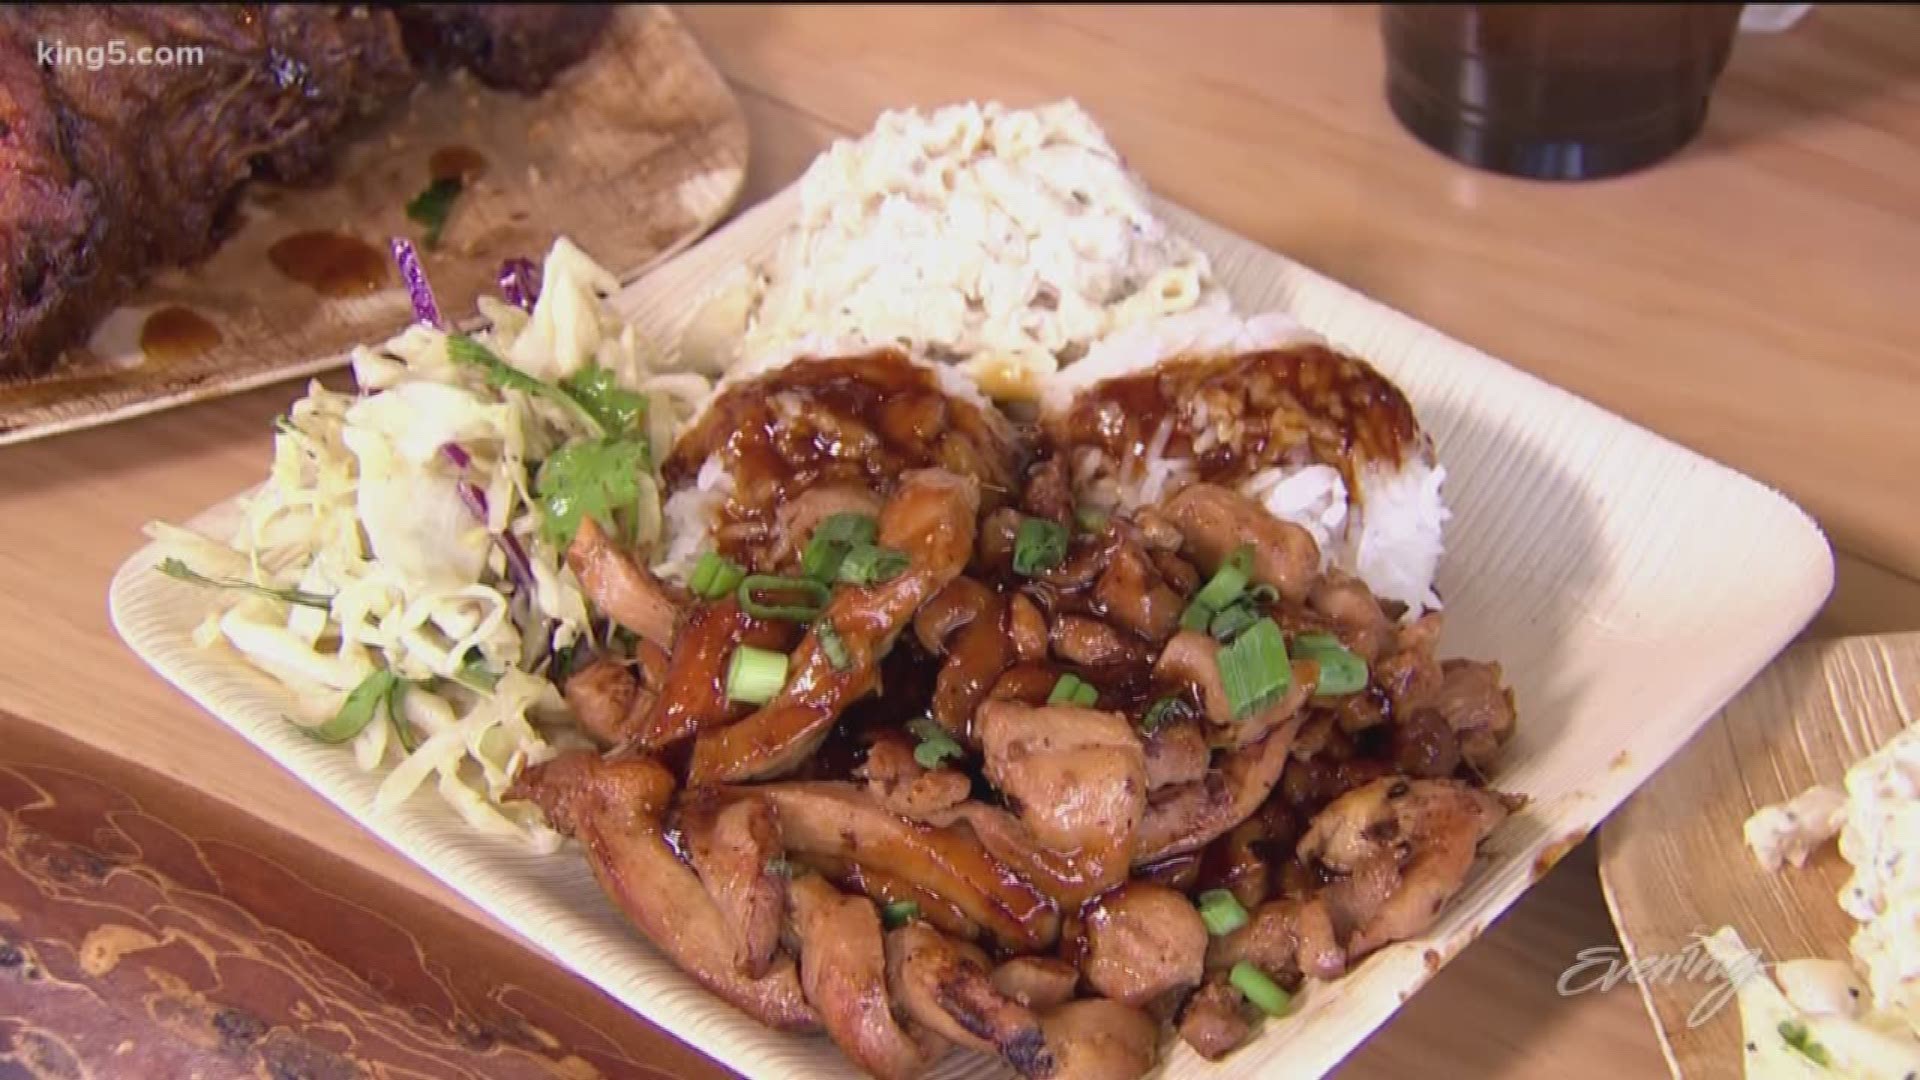 KING 5 Evening's personalities chose some of their favorite restaurants featured on the show in 2018.